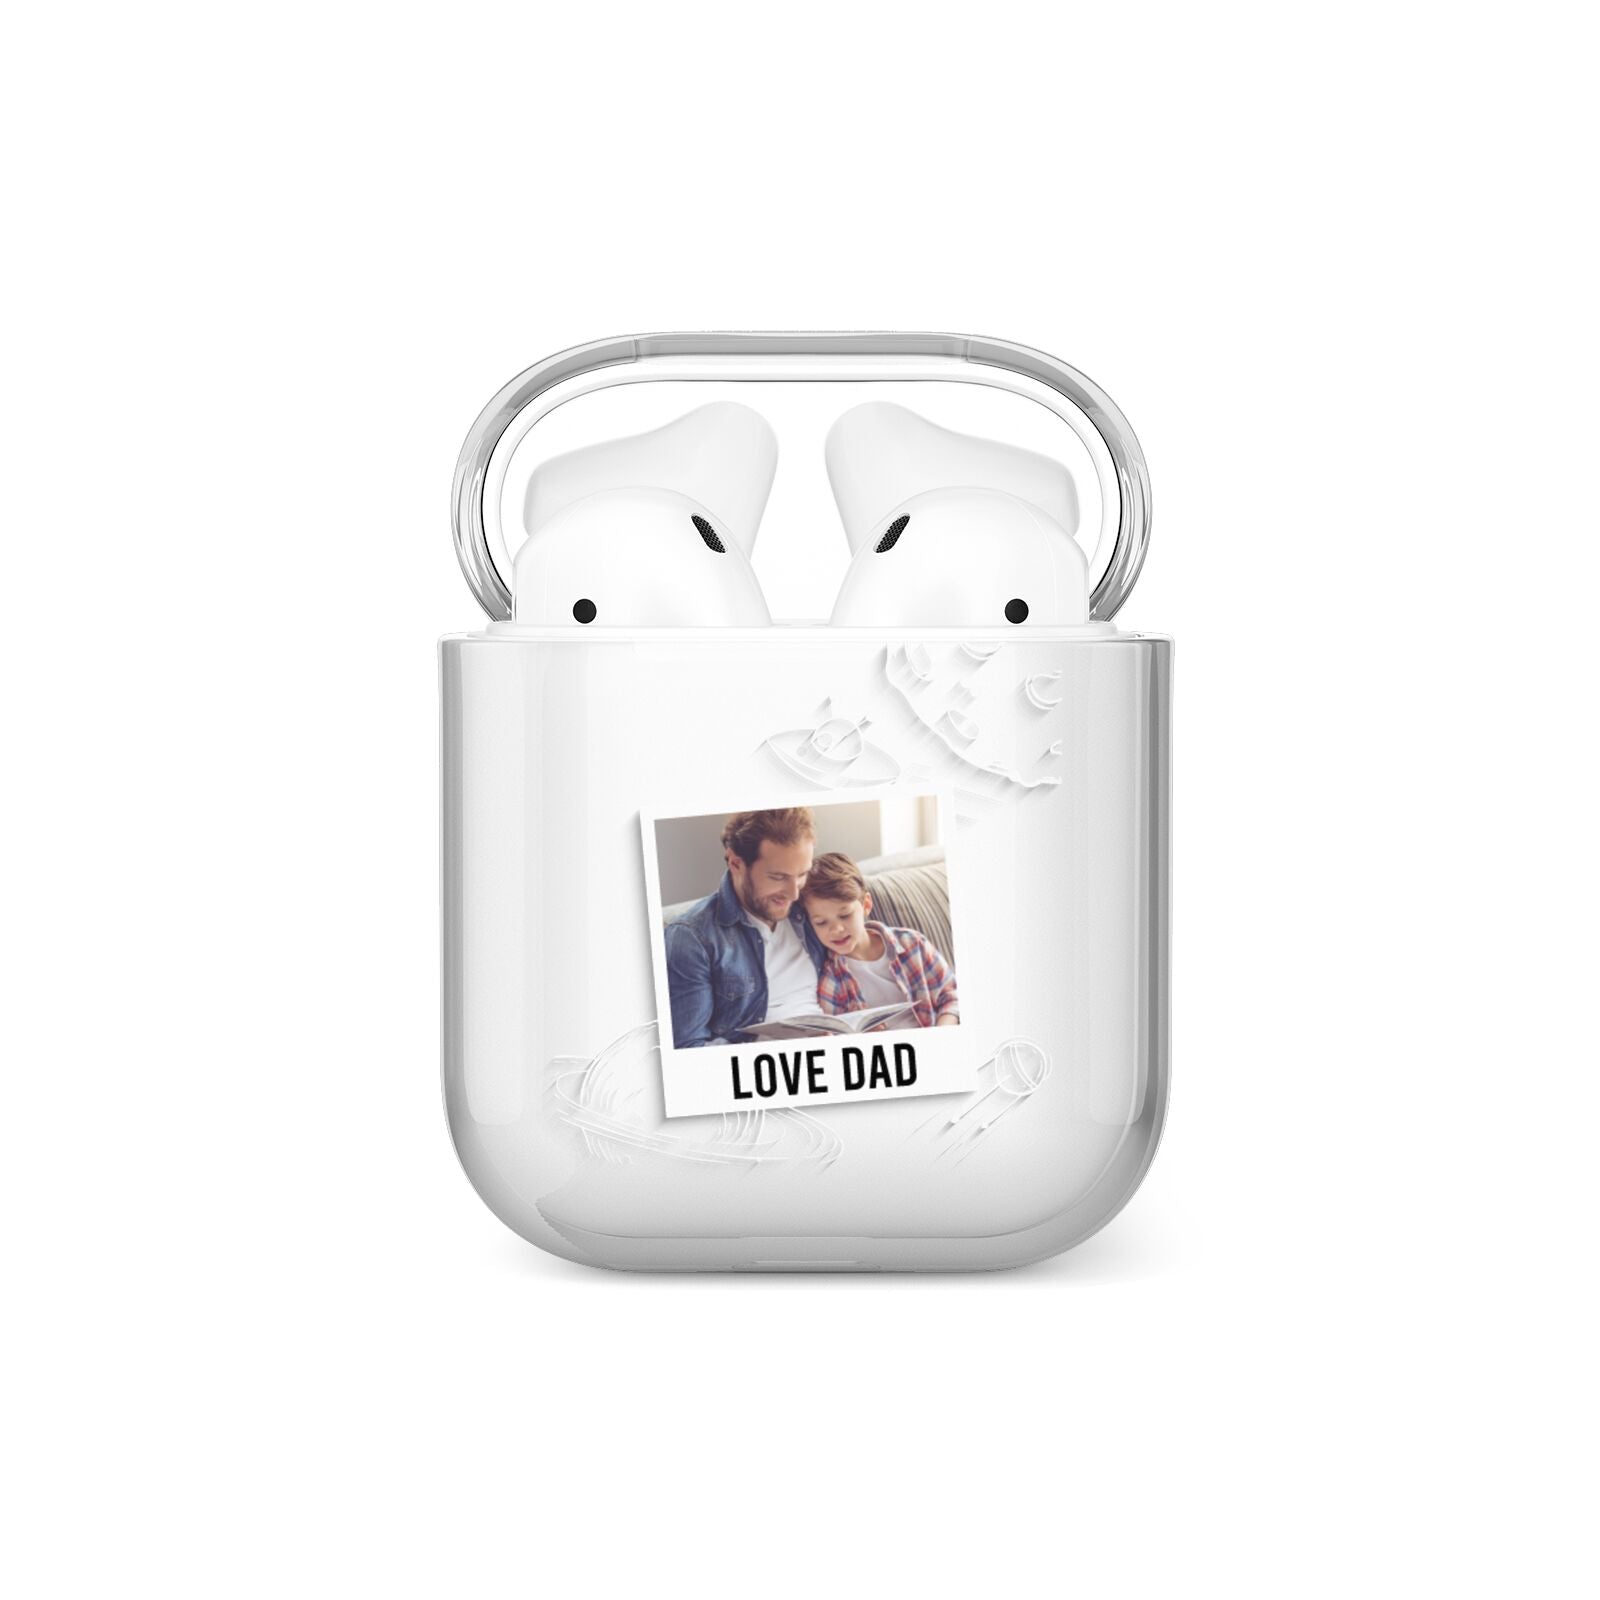 Personalised From Dad Photo AirPods Case